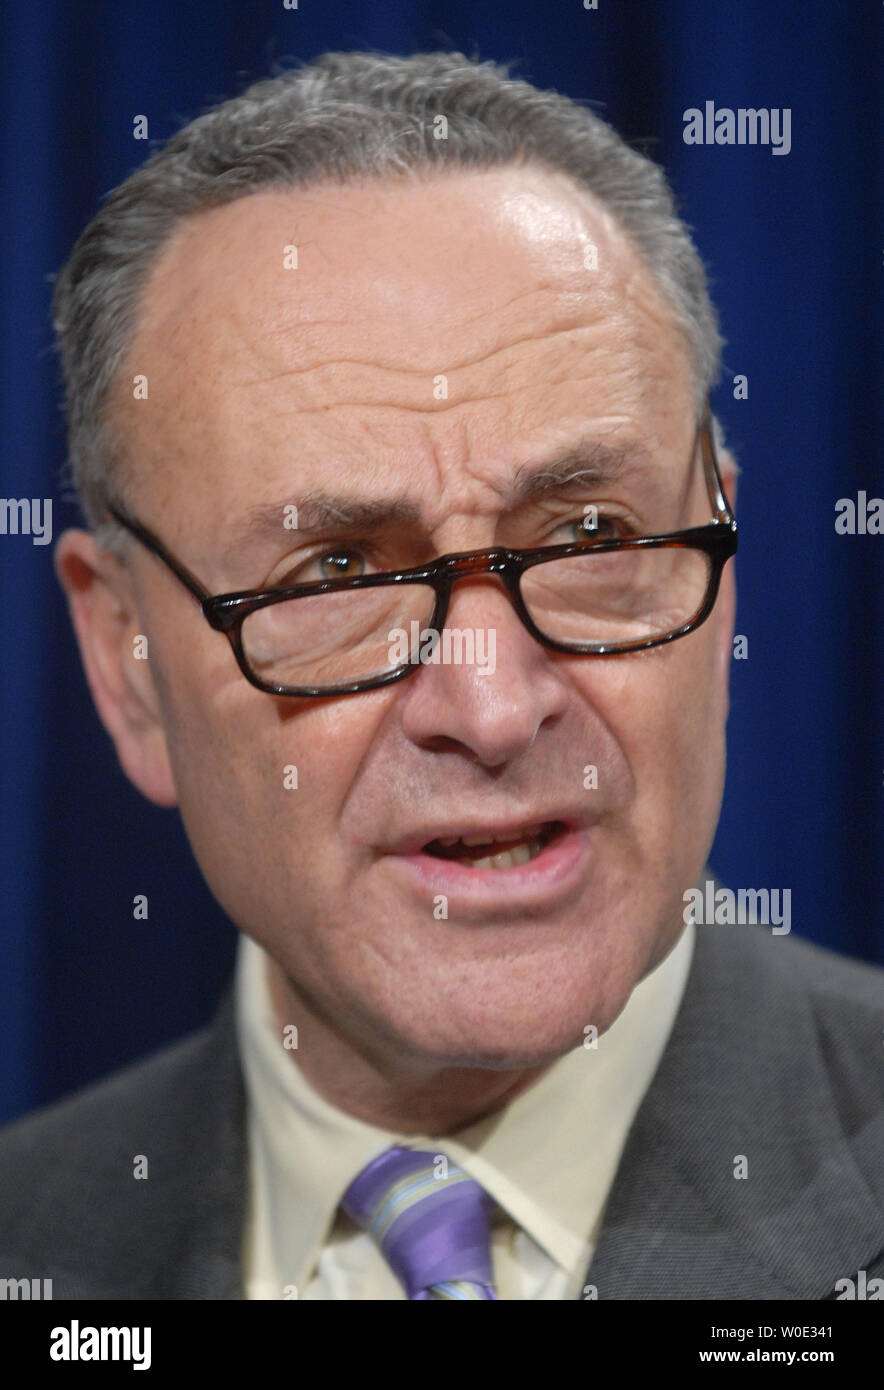 Sen. Charles Schumer (D-NY) speaks on President Bush's outlook on the economy at a press conference in Washington on December 17, 2007. Schumer says that Bush is not paying attention to the sub-prime mortgage crisis, rising energy costs and is minimizing the cost of the Iraq War. (UPI Photo/Kevin Dietsch) Stock Photo